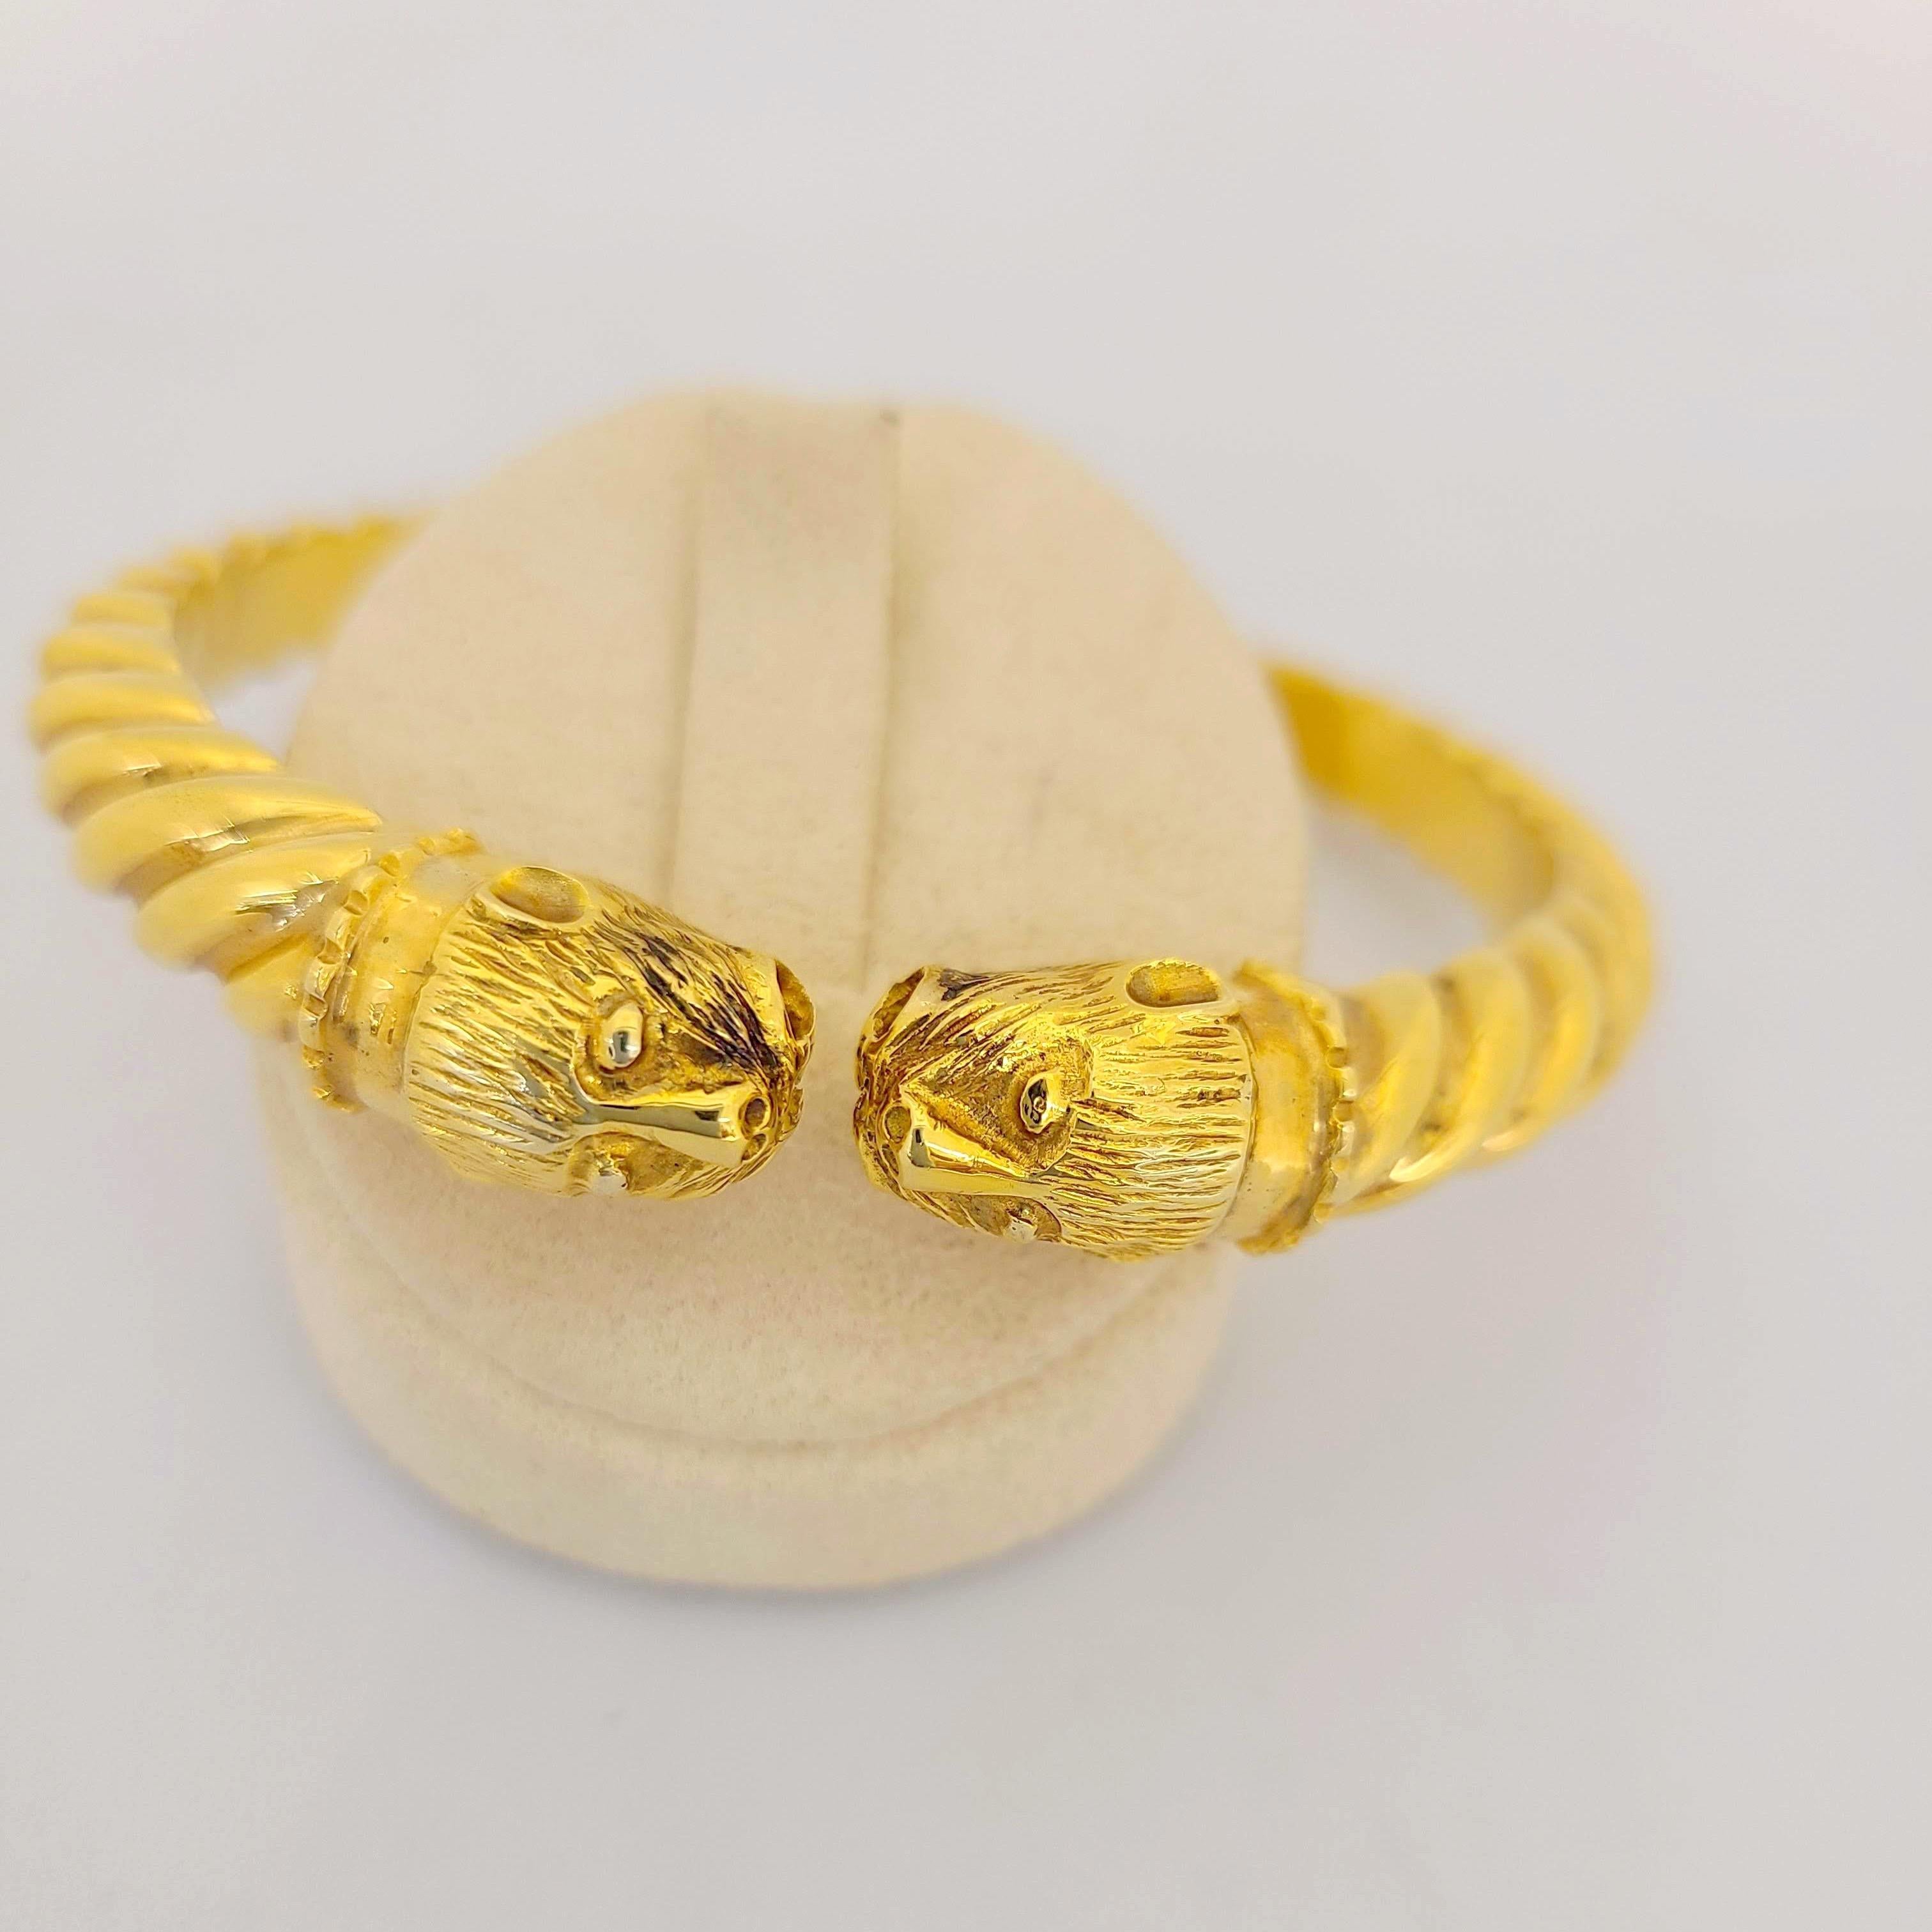 This 24/18 karat yellow gold bracelet was designed by Zolotas of Athens , Greece. Founded in 1895 the company merges Greek heritage with modern style to create these timeless pieces. Coveted by Royals and Actresses.
The bracelet is designed with two